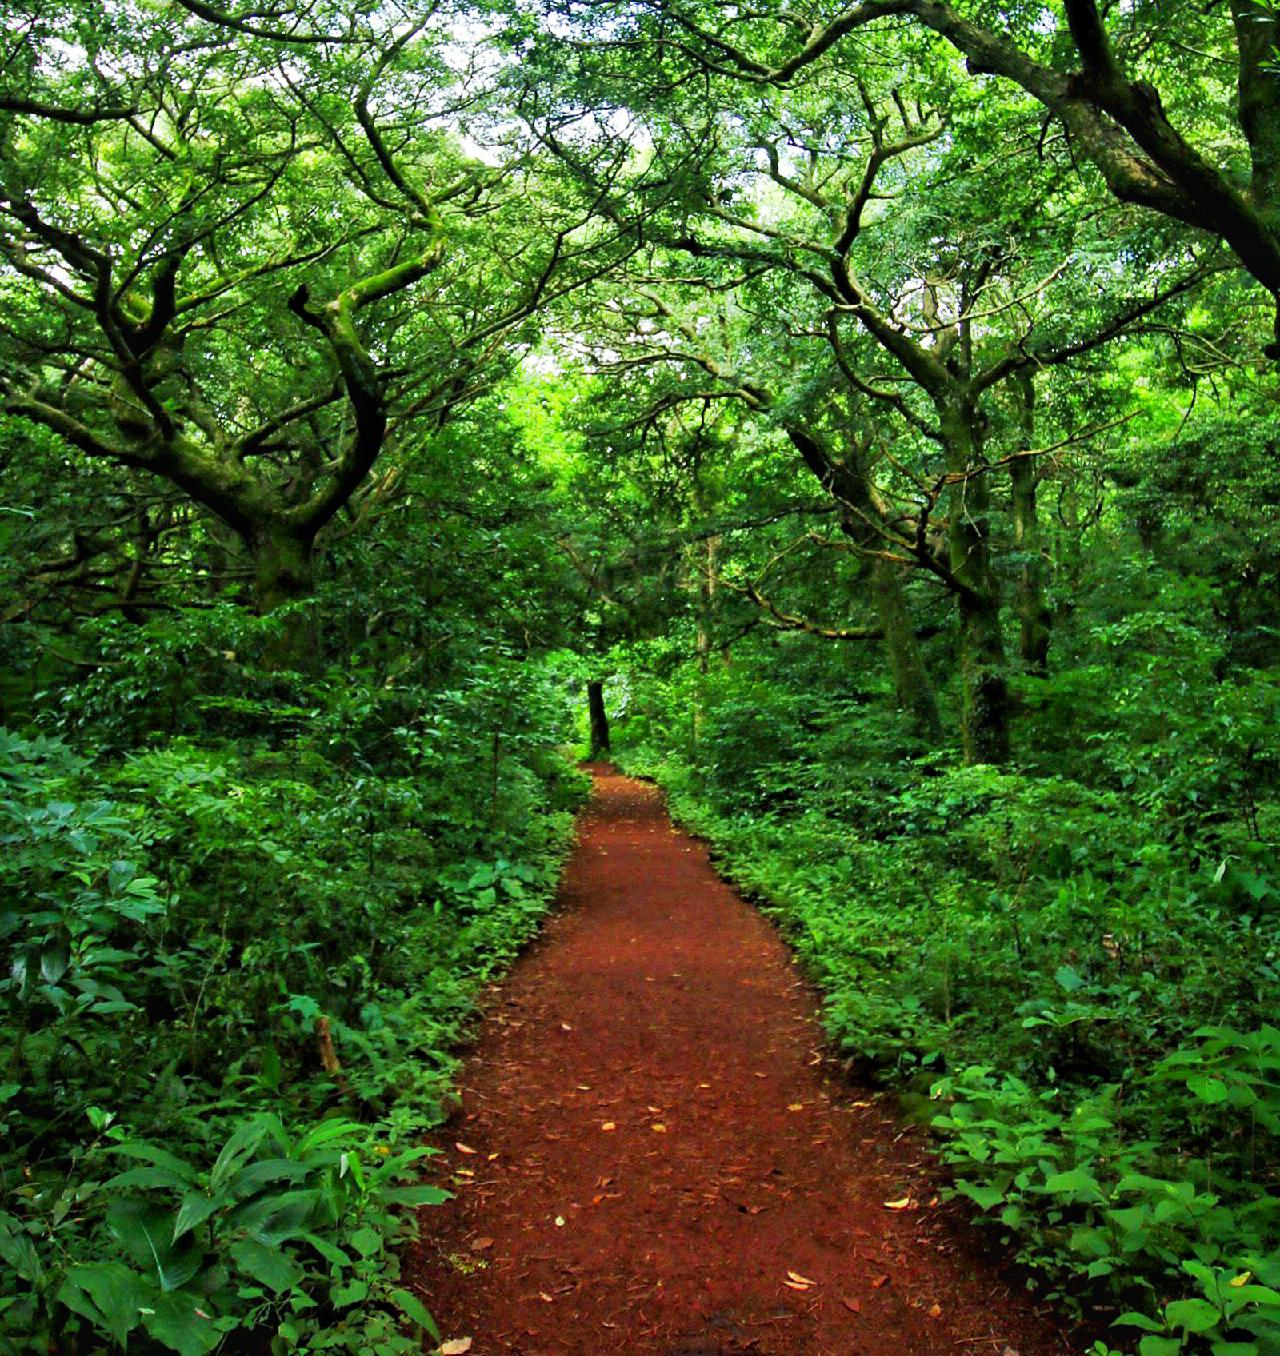 Experience Jeju’s Coast, Forest, and Hills through Running